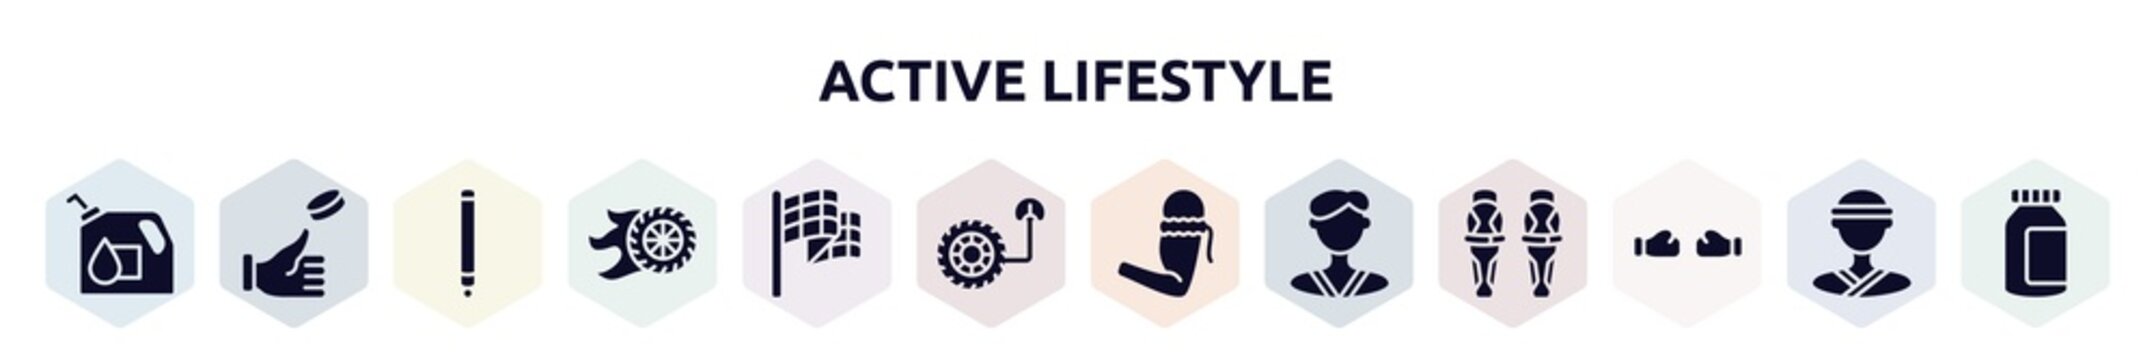 active lifestyle filled icons set. glyph icons such as oil down, coin toss, glowstick, burnout, victory lap, tire pressure, armband, karateka, punching icon.